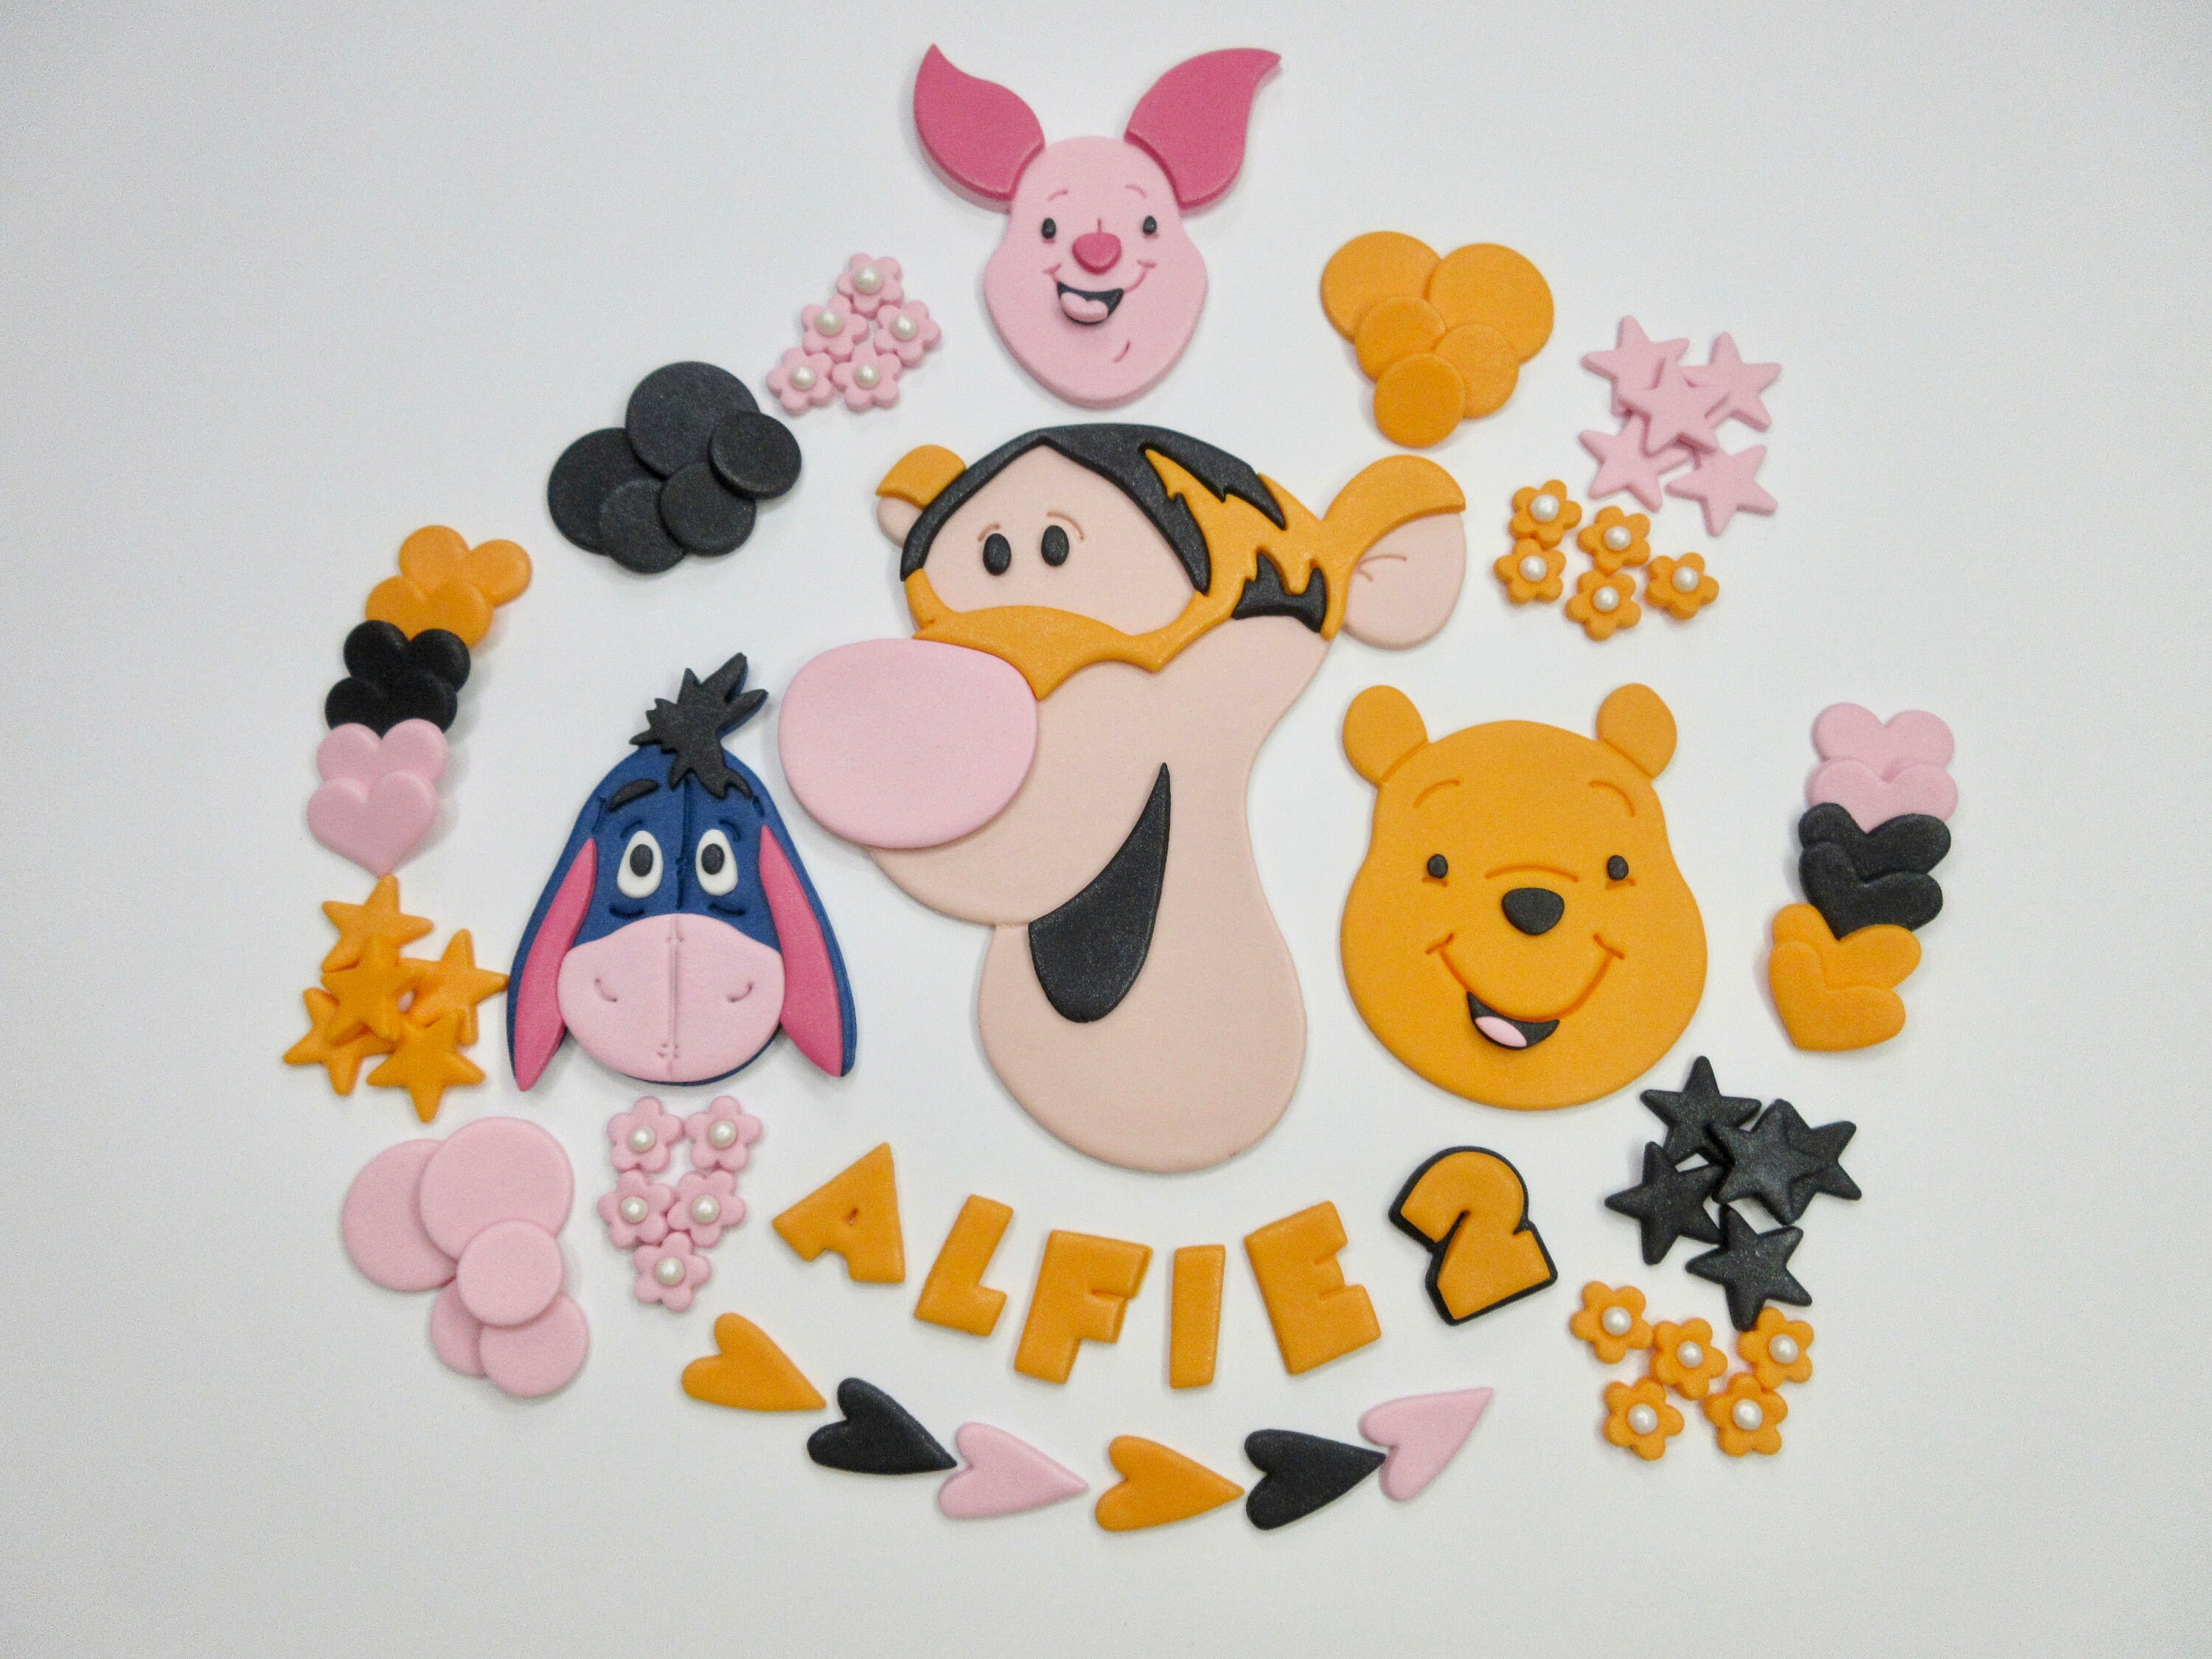 Edible Sugar Winnie the Pooh Personalised Cake Topper Name Set for